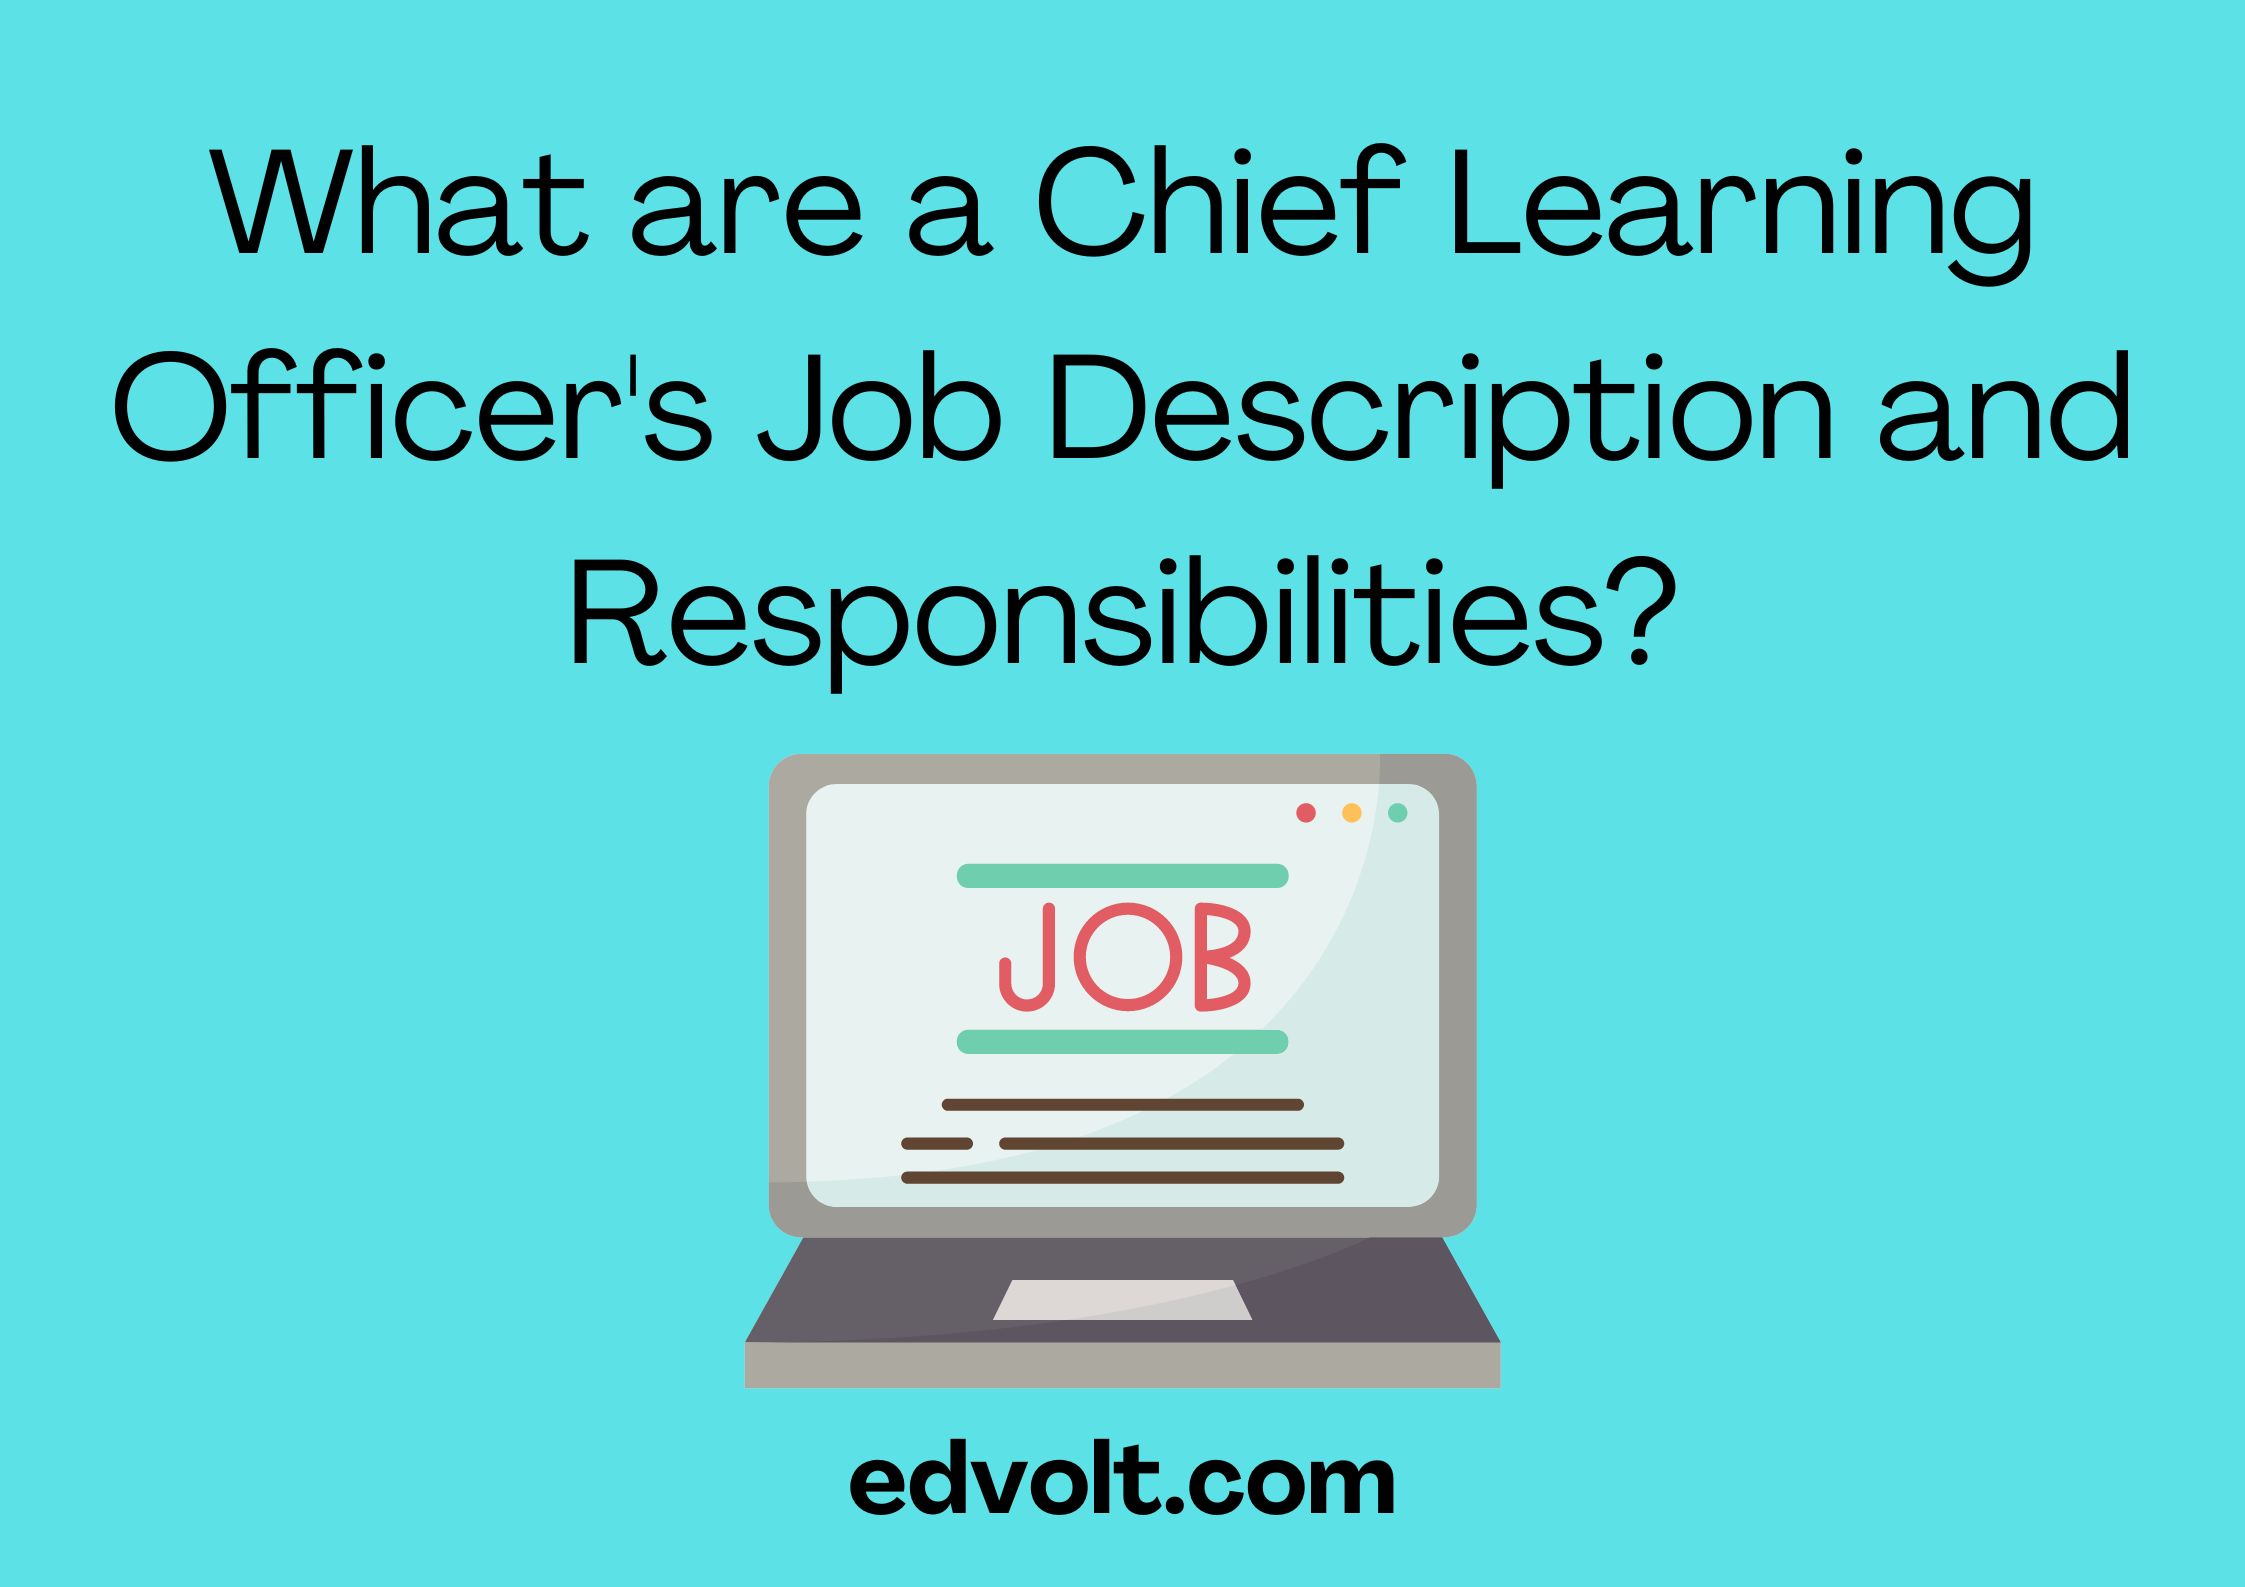 What are a Chief Learning Officer's Job Description and Responsibilities?